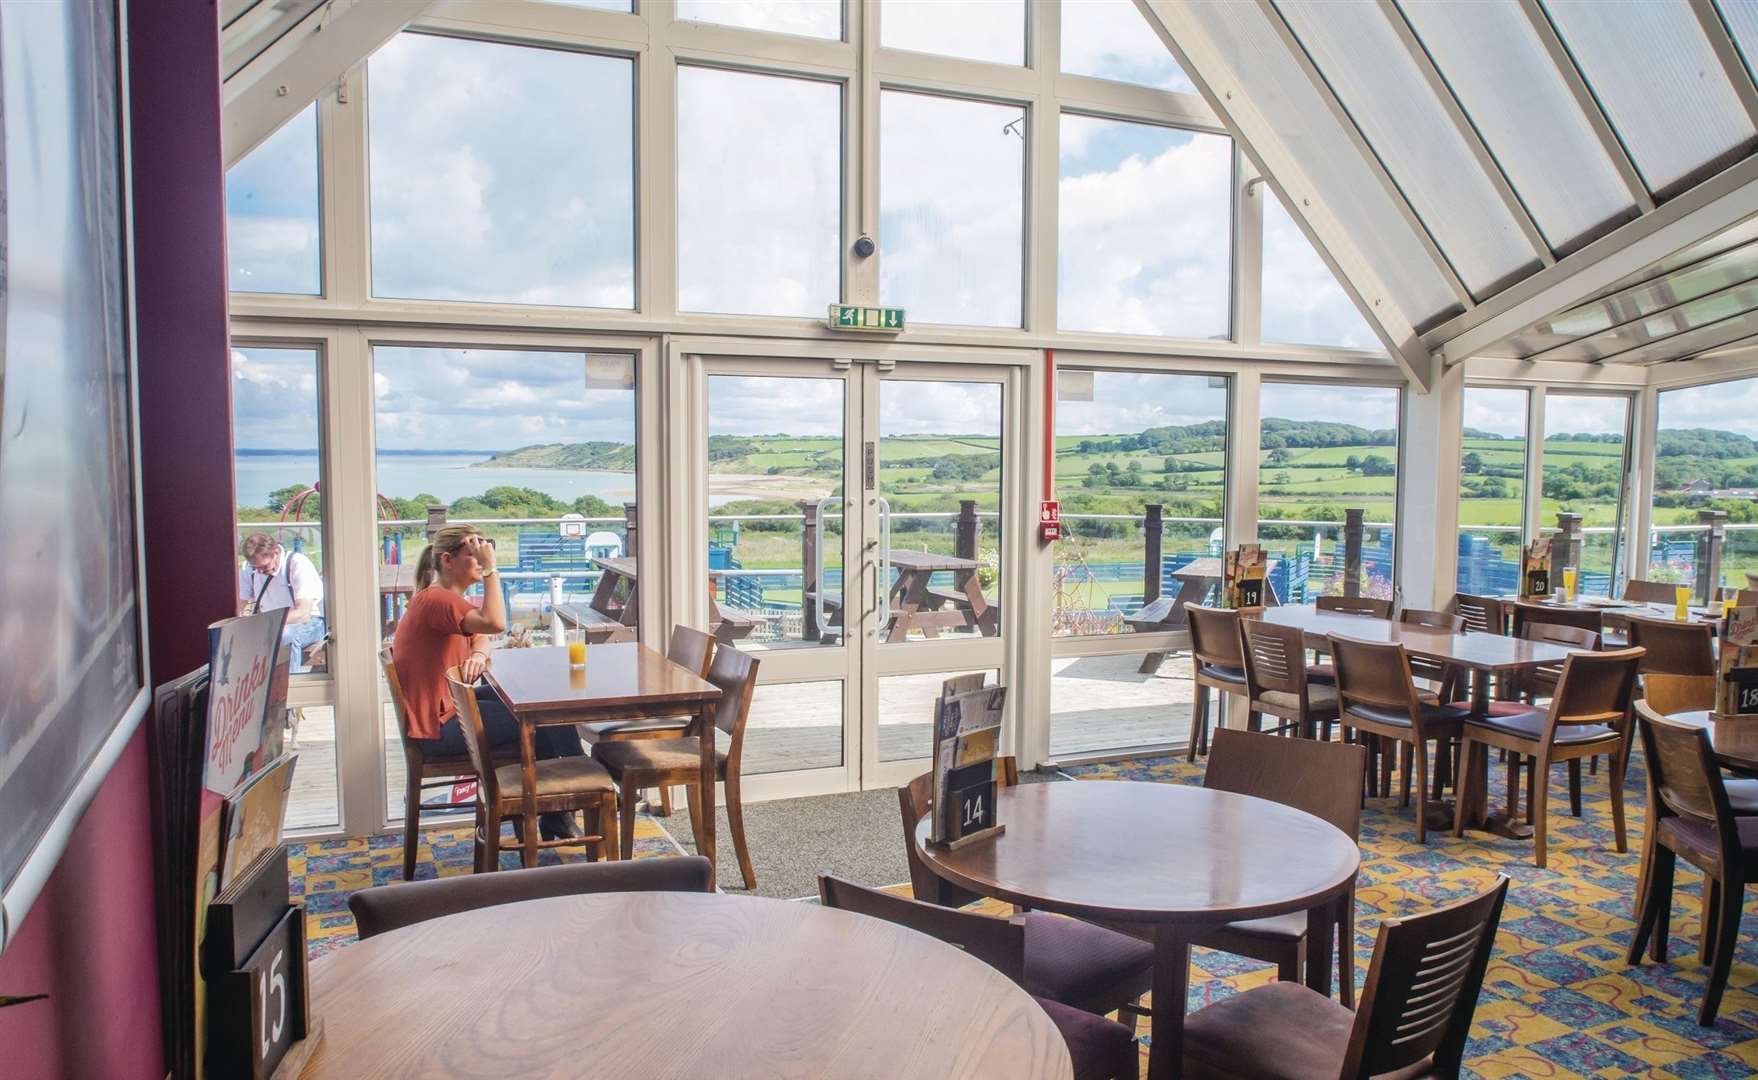 The view is stunning from the Boathouse Bar & Restaurant